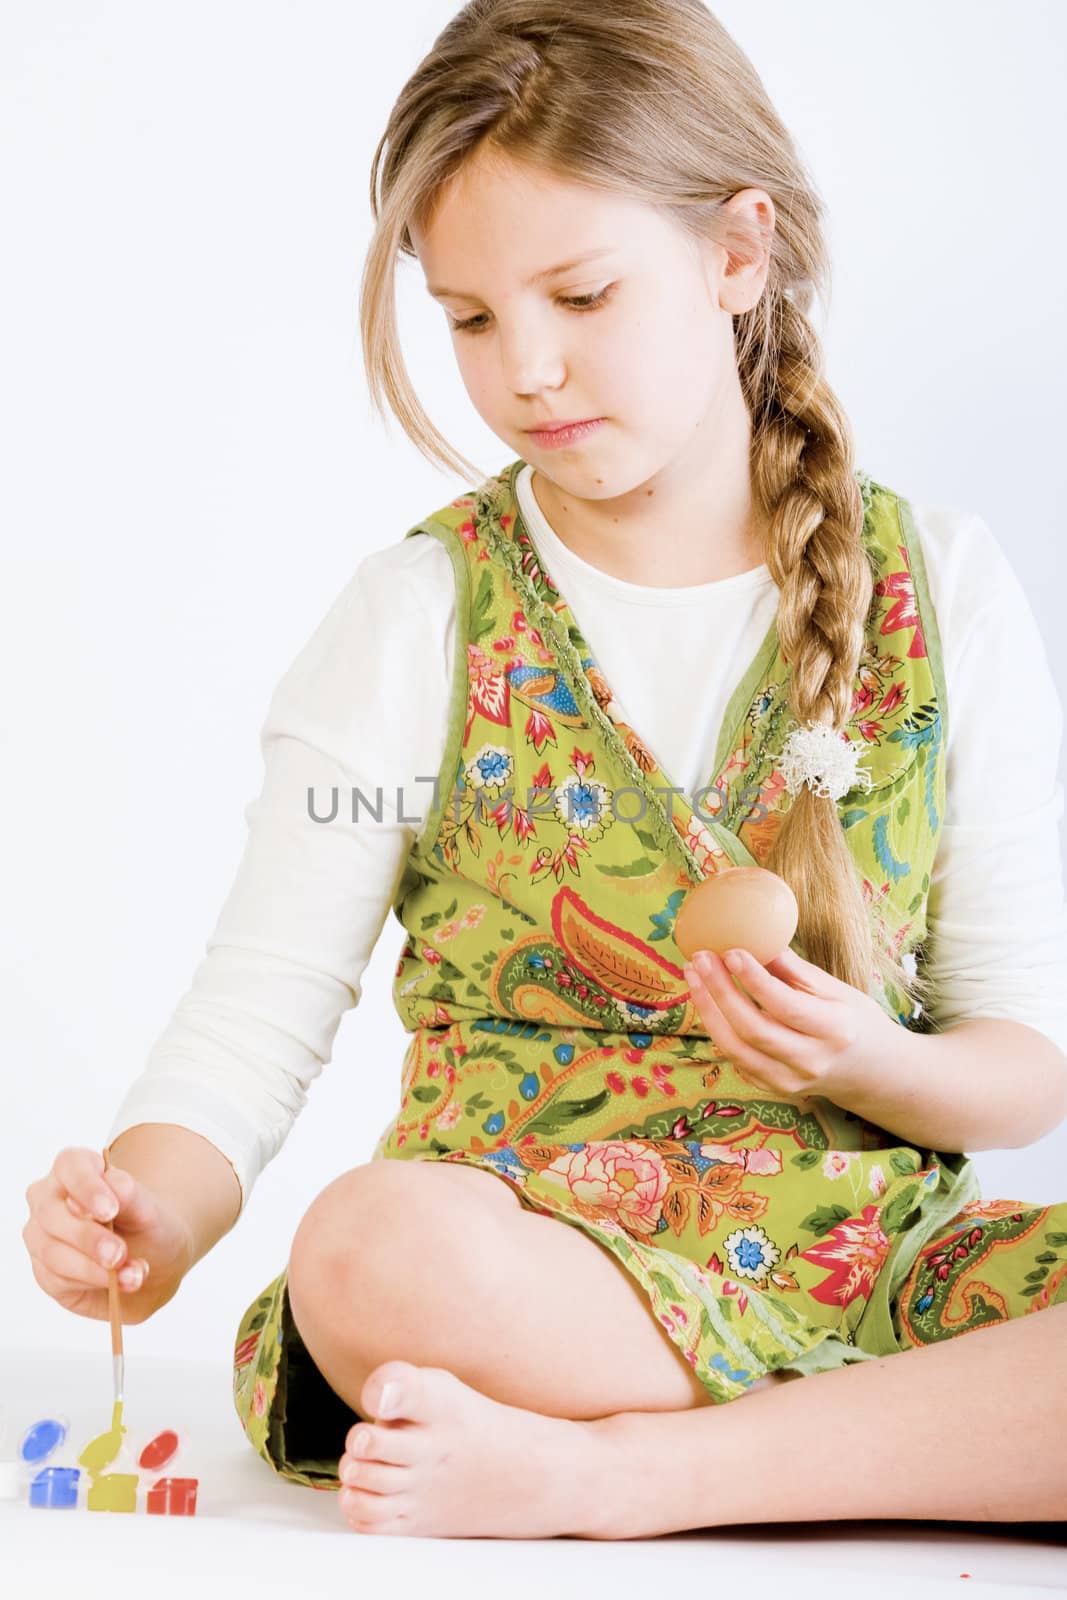 Young girl painting eggs for Easter by DNFStyle